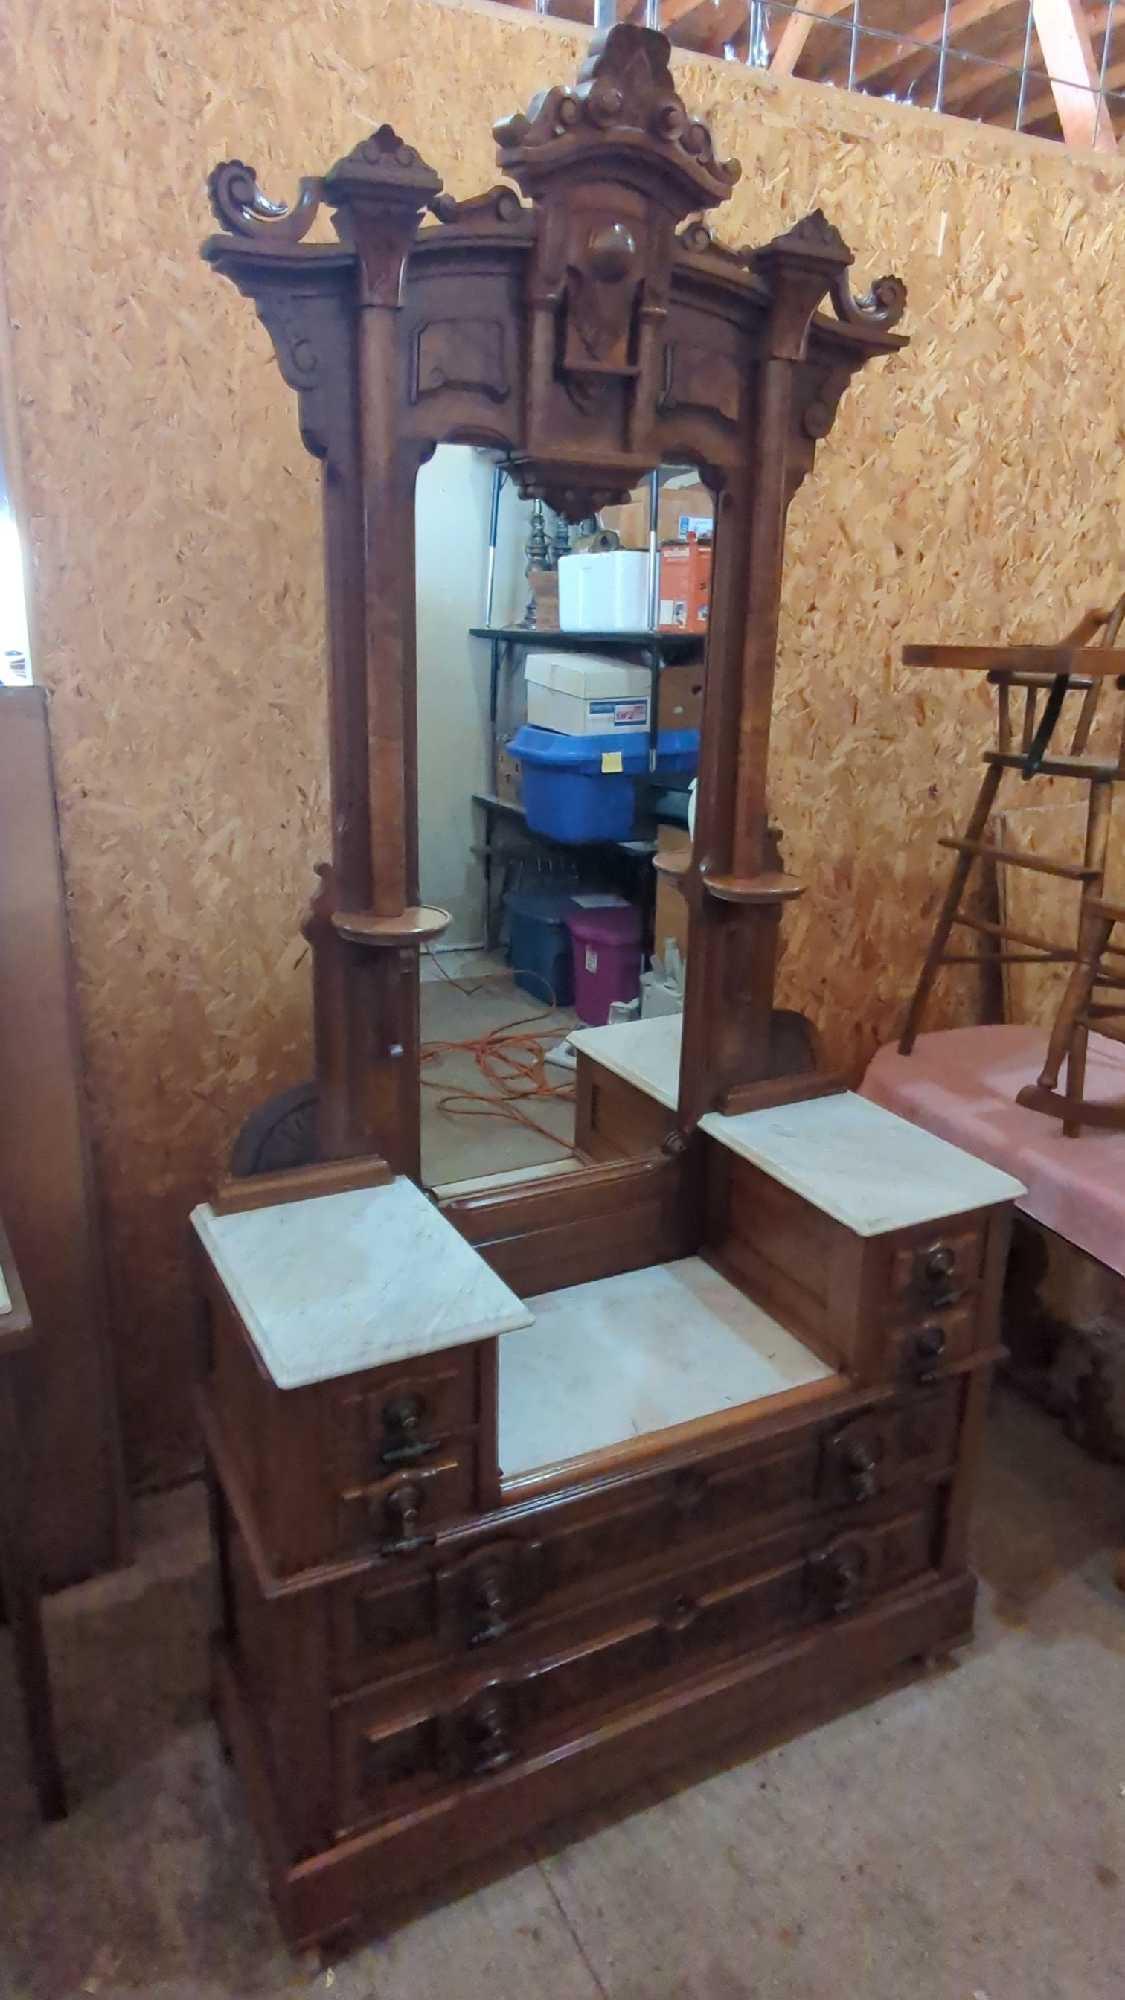 VICTORIAN WALNUT DRESSER WITH MIRROR DIMENSIONS IN PICTURE